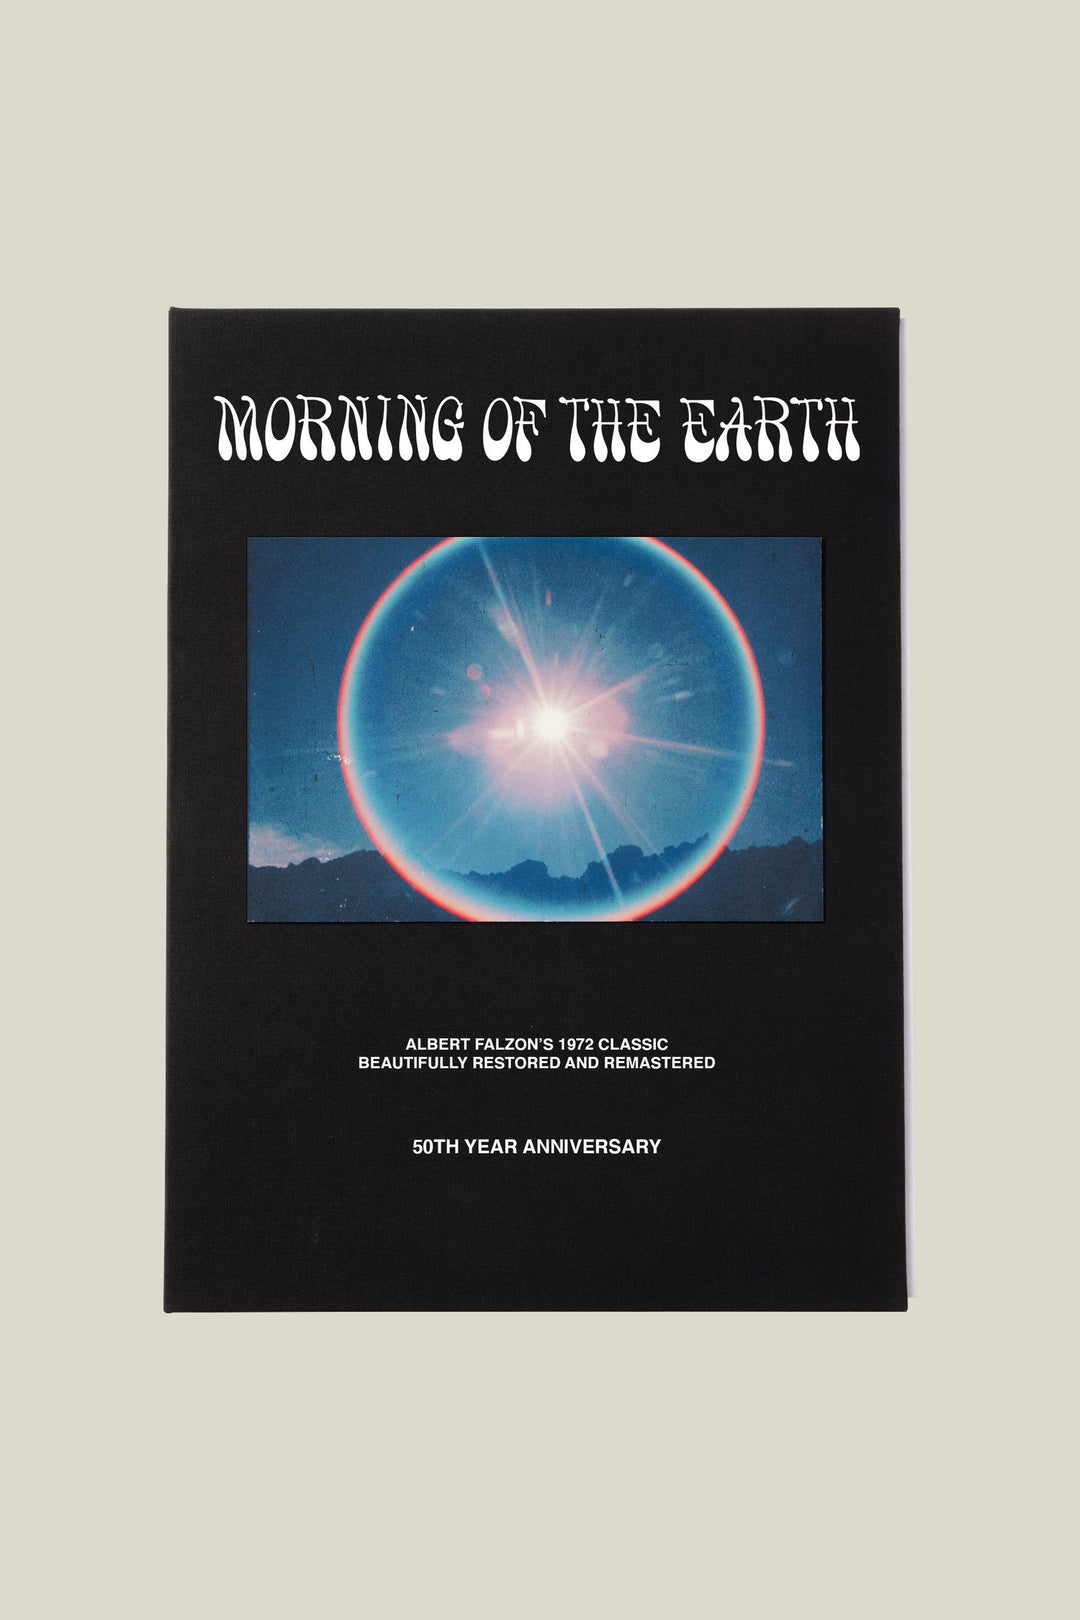 Morning of the Earth - 50th Anniversary book